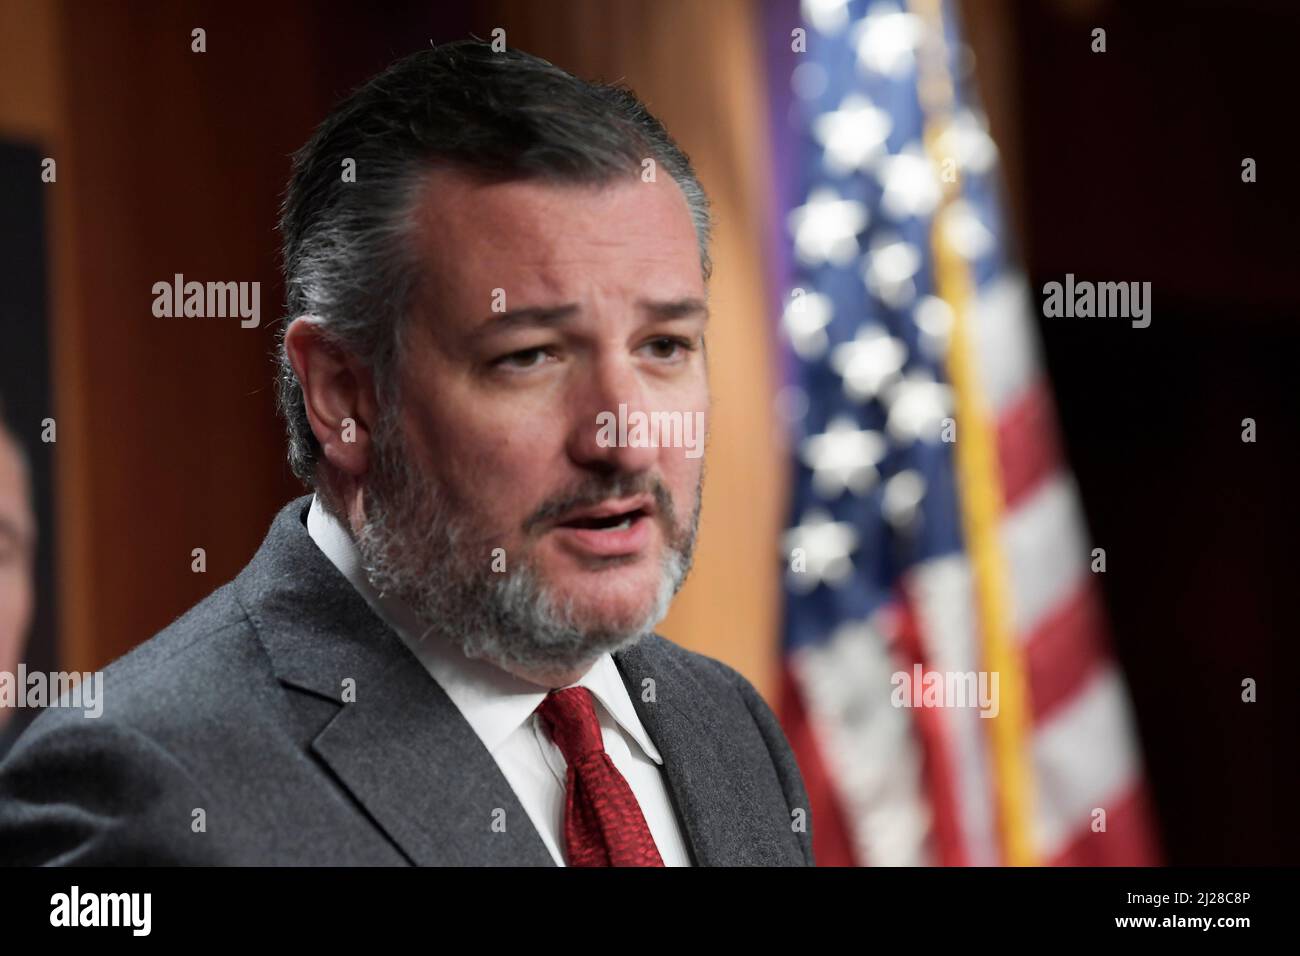 Washington, USA. 30th Mar, 2022. Senator Ted Cruz(R-TX) speaks about US-MX border during a press conference, today on March 30, 2022 at SVC/Capitol Hill in Washington DC, USA. (Photo by Lenin Nolly/Sipa USA) Credit: Sipa USA/Alamy Live News Stock Photo